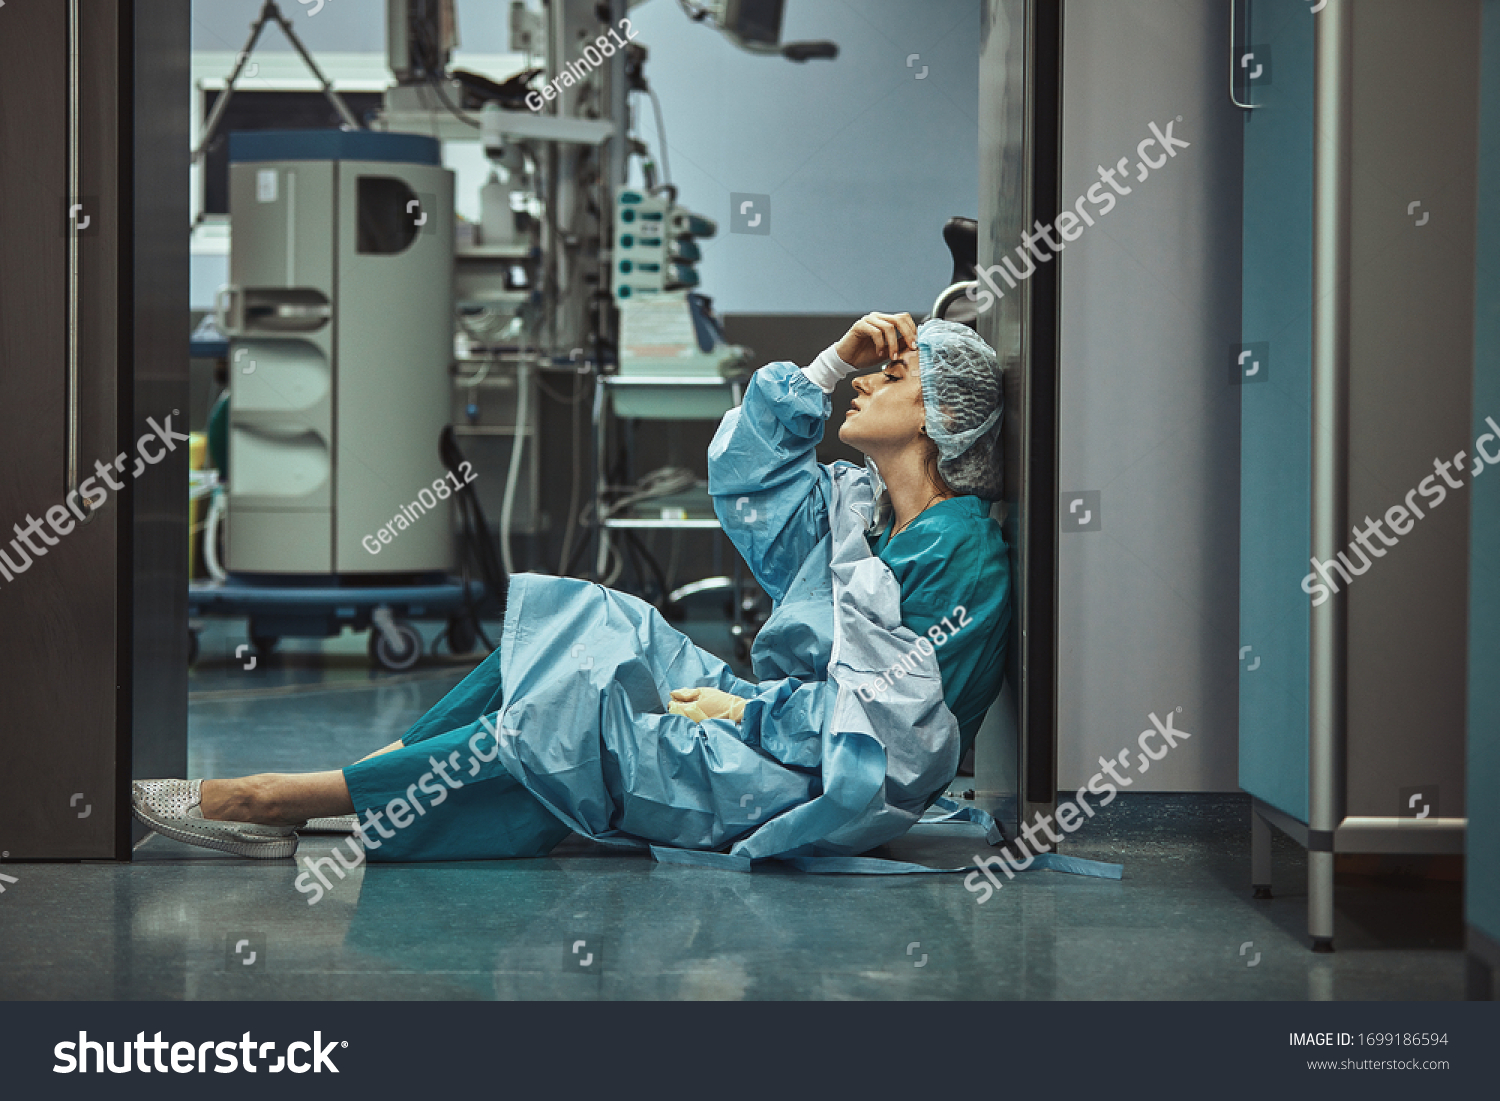 Woman surgeon looking sadness fatigue after surgery copyspace stress depression guilt unhappy problem worker medicine healthcare emotions #1699186594